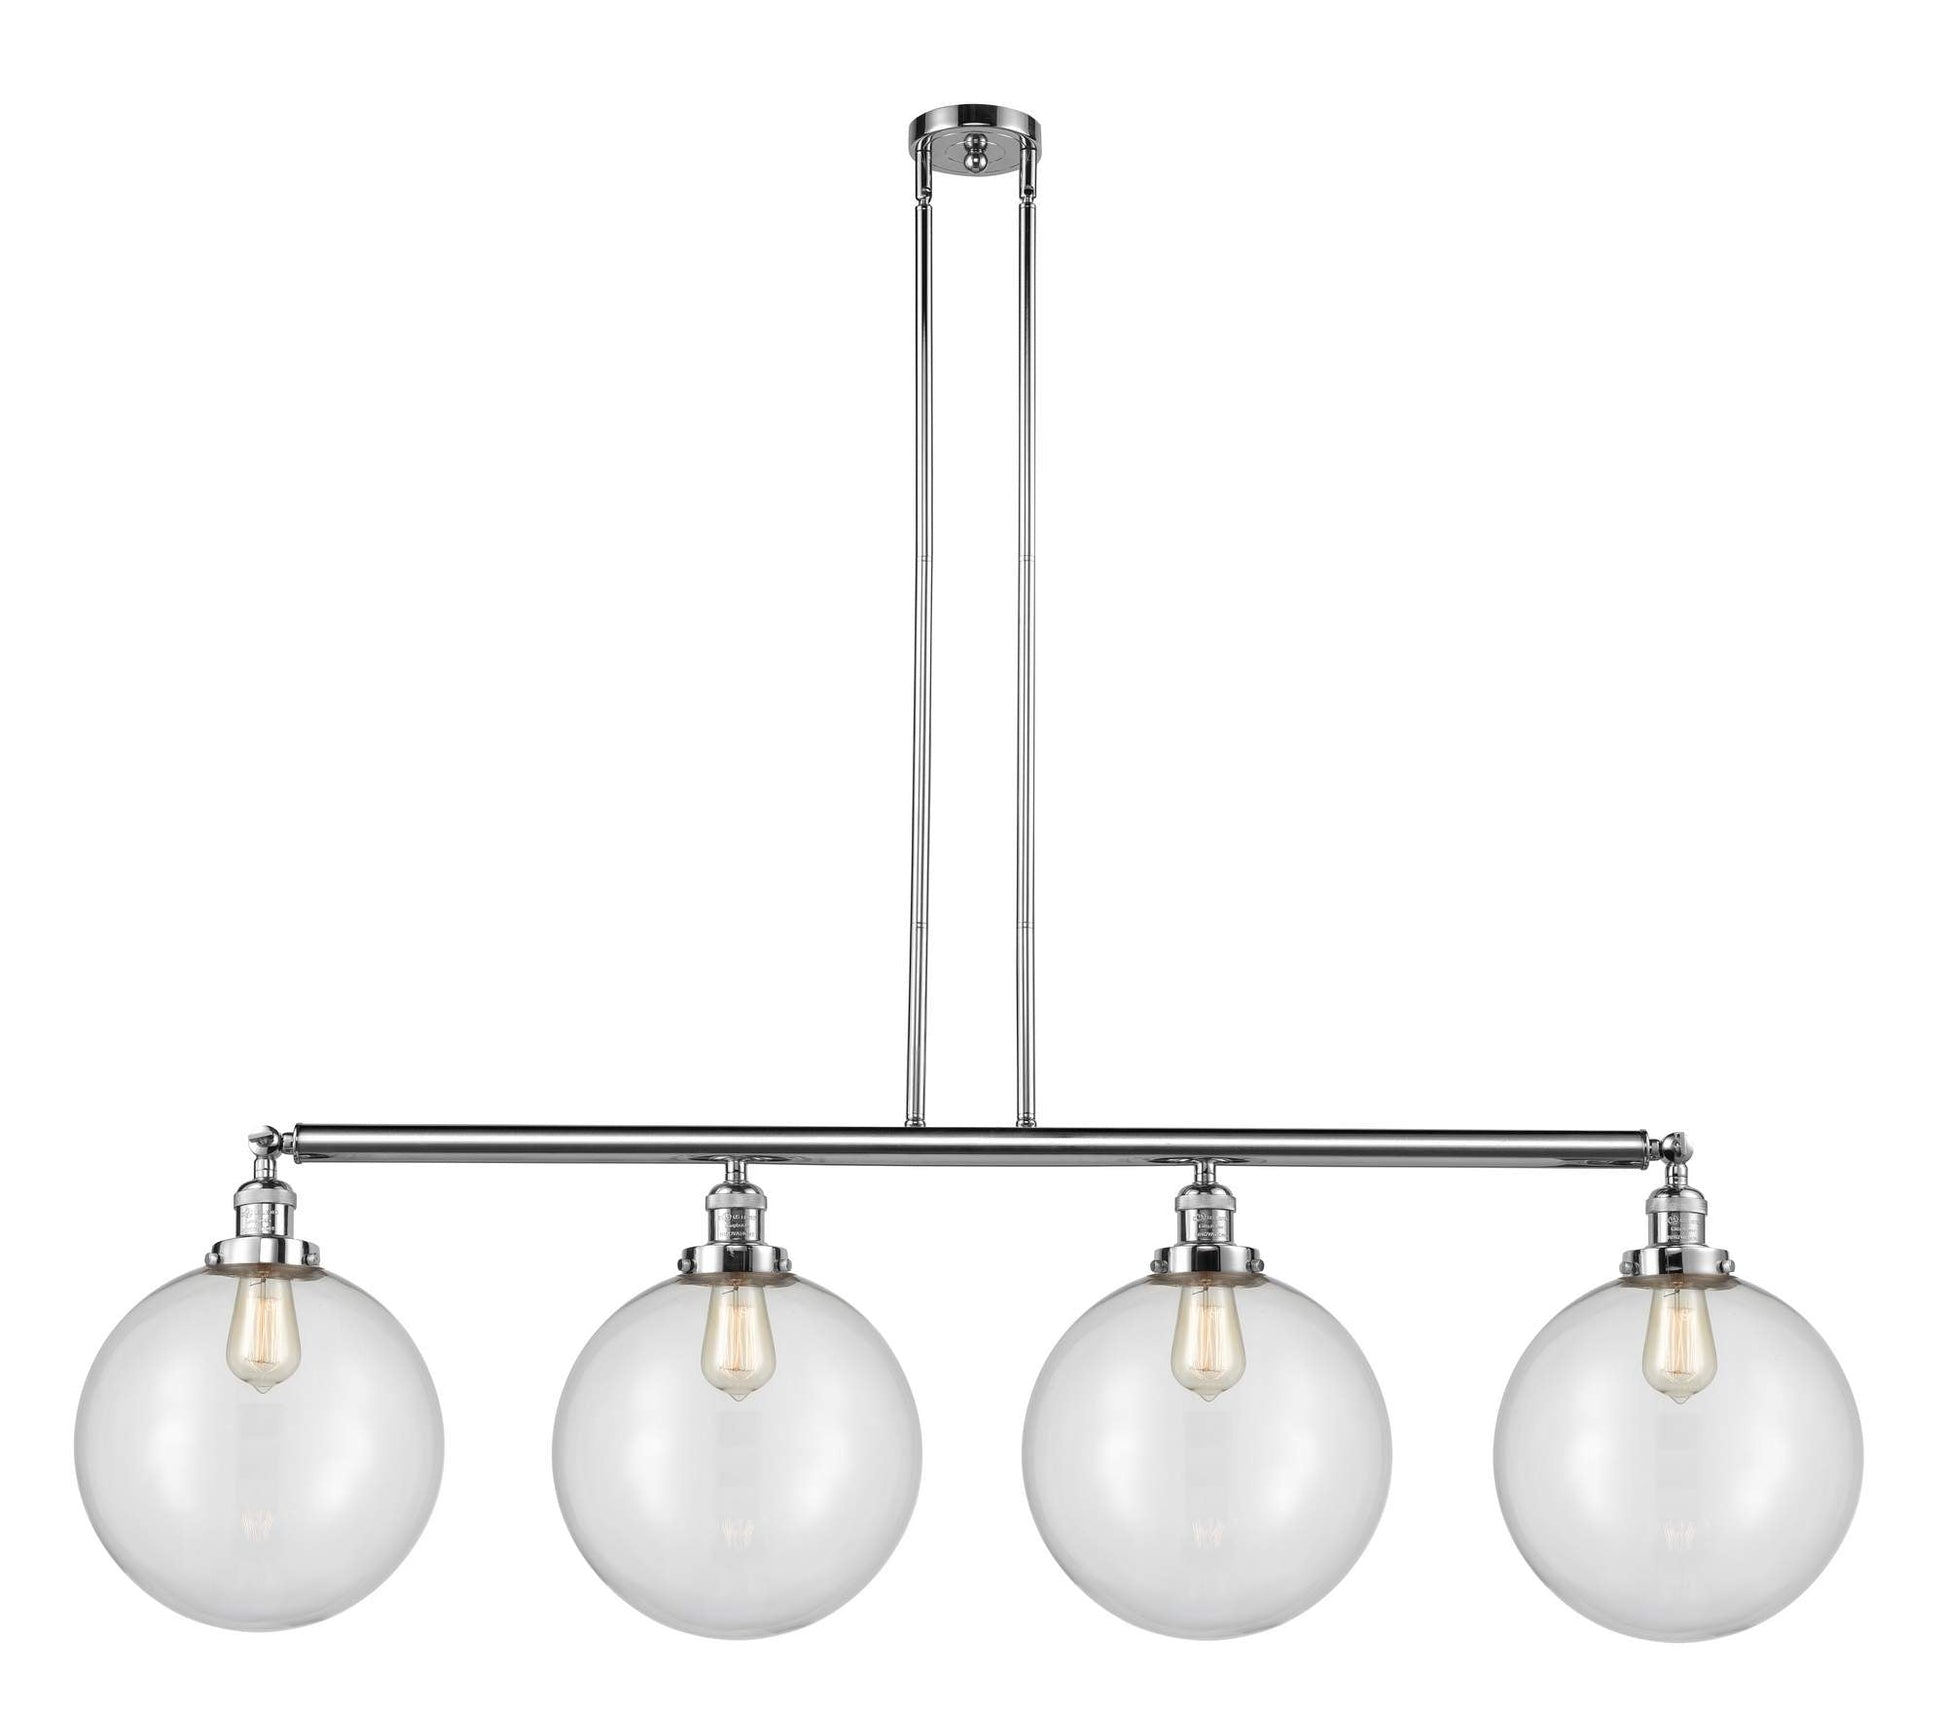 214-PC-G202-12 4-Light 56" Polished Chrome Island Light - Clear Beacon Glass - LED Bulb - Dimmensions: 56 x 12 x 16<br>Minimum Height : 26<br>Maximum Height : 50 - Sloped Ceiling Compatible: Yes